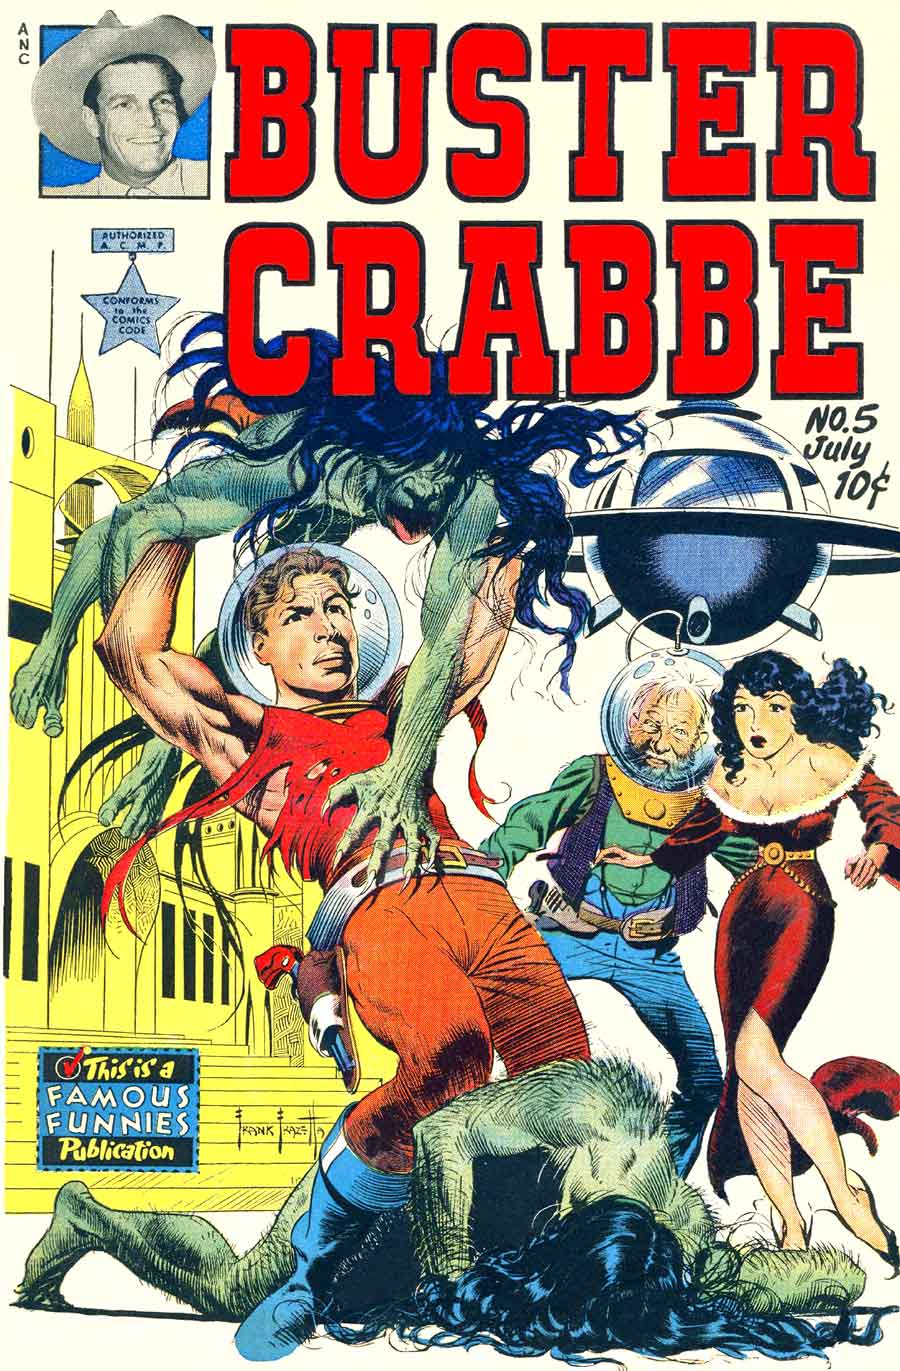 Buster Crabbe #5 golden age 1950s science fiction comic book cover art by Frank Frazetta